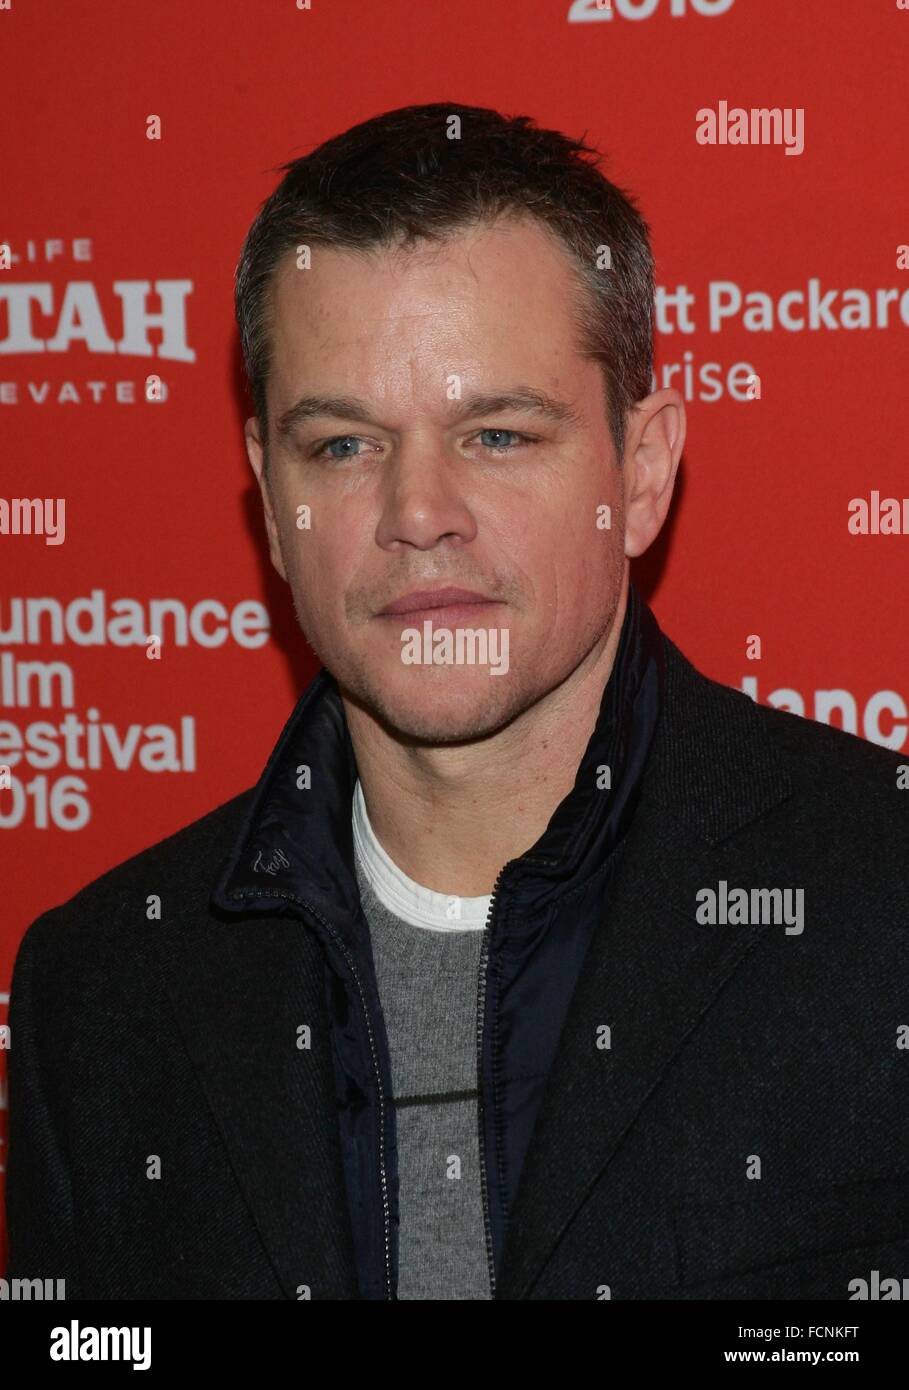 Park City, UT, USA. 23rd Jan, 2016. Matt Damon at arrivals for MANCHESTER BY THE SEA Premiere at Sundance Film Festival 2016, The Eccles Center for the Performing Arts, Park City, UT January 23, 2016. © James Atoa/Everett Collection/Alamy Live News Stock Photo